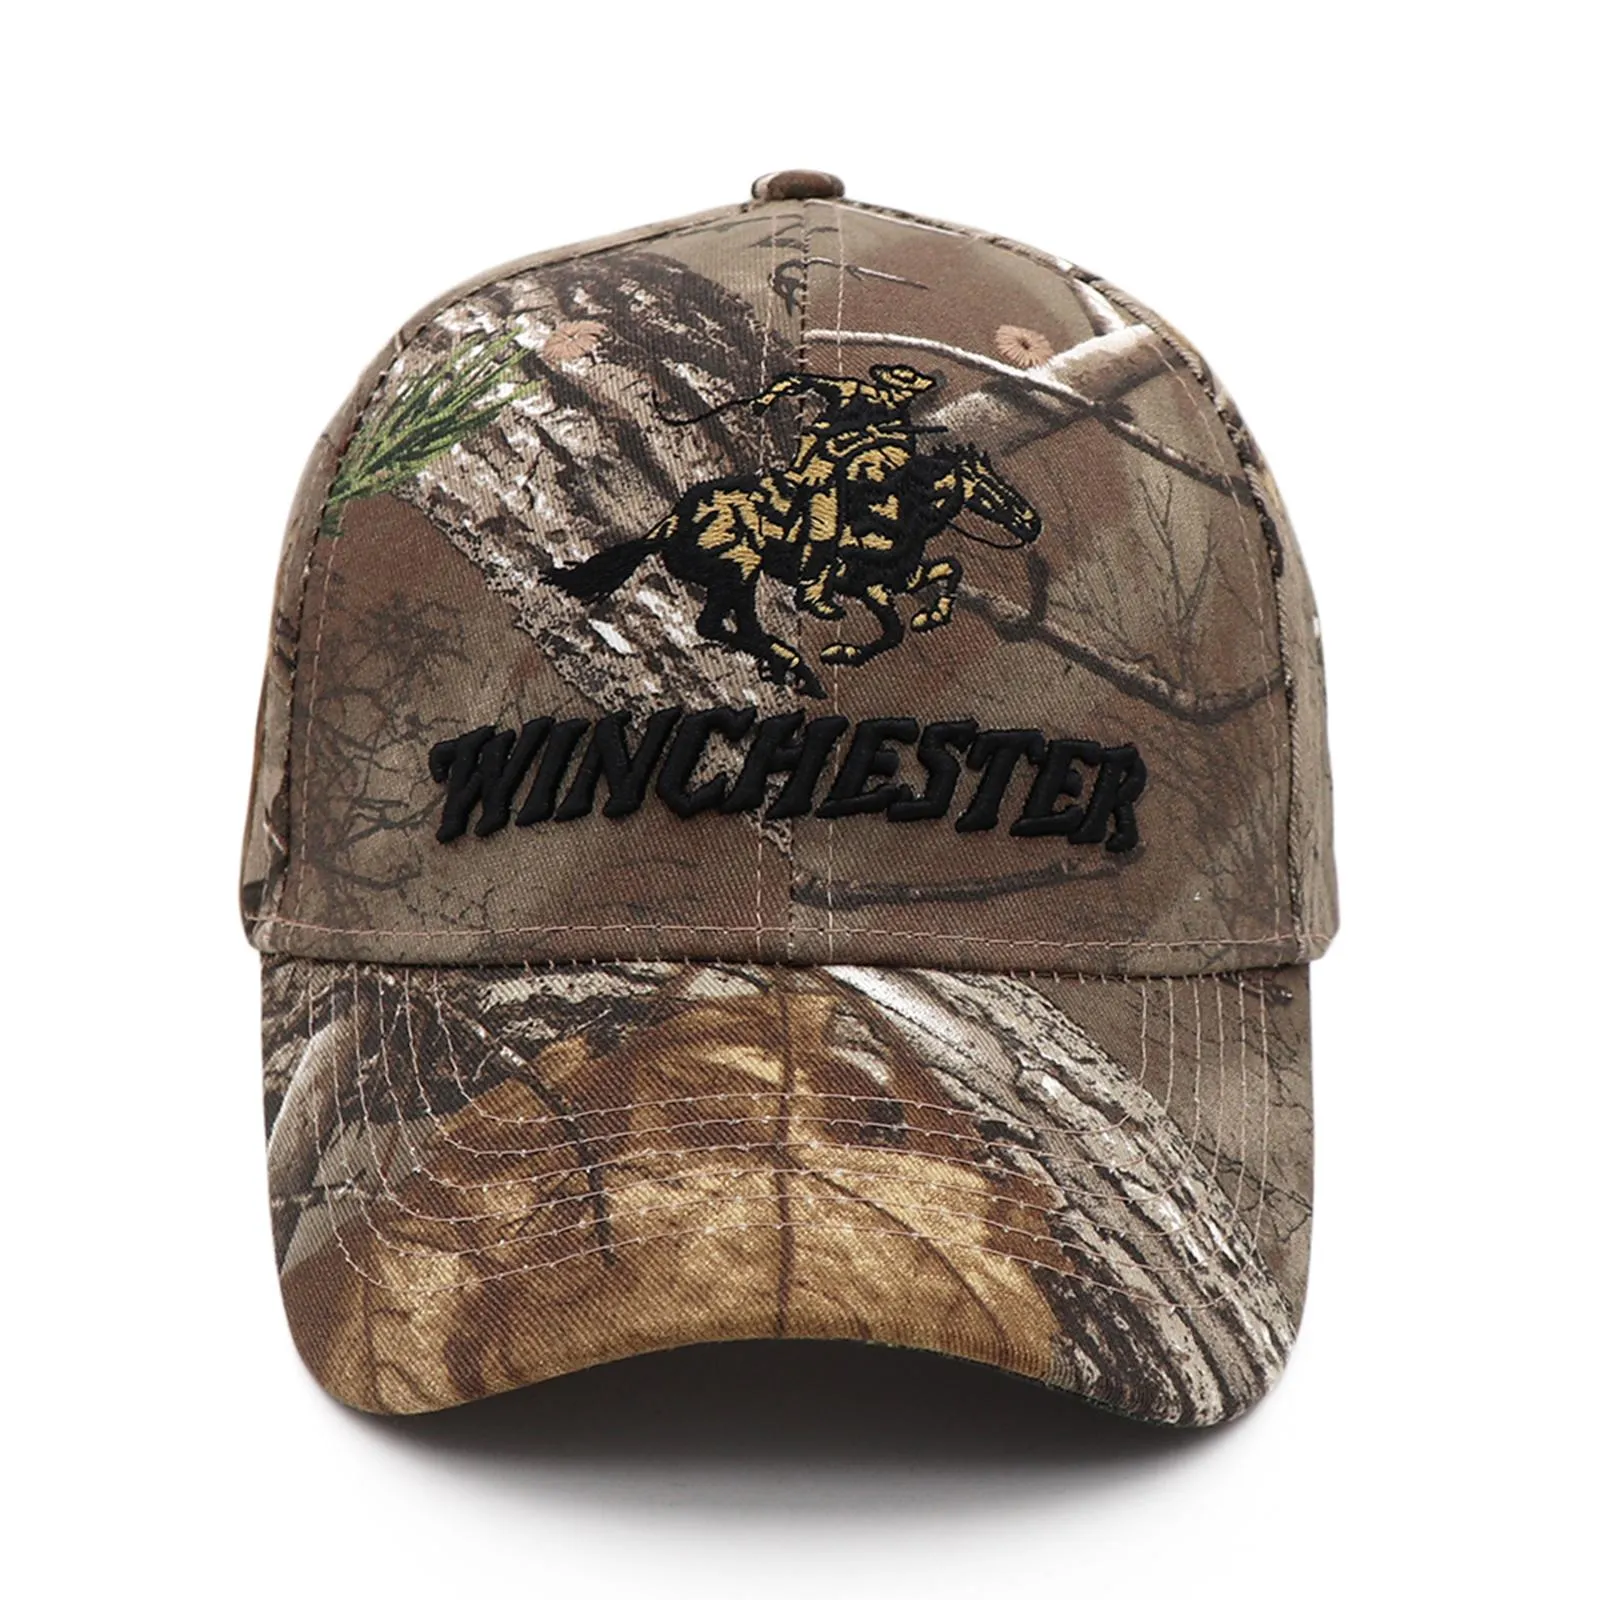 2021 Tactical Winchester Shooting Sports CAMO Multicam Baseball Cap For Men  Ideal For Fishing, Hunting, Hiking And Jungle Activities From Rnoq, $14.85